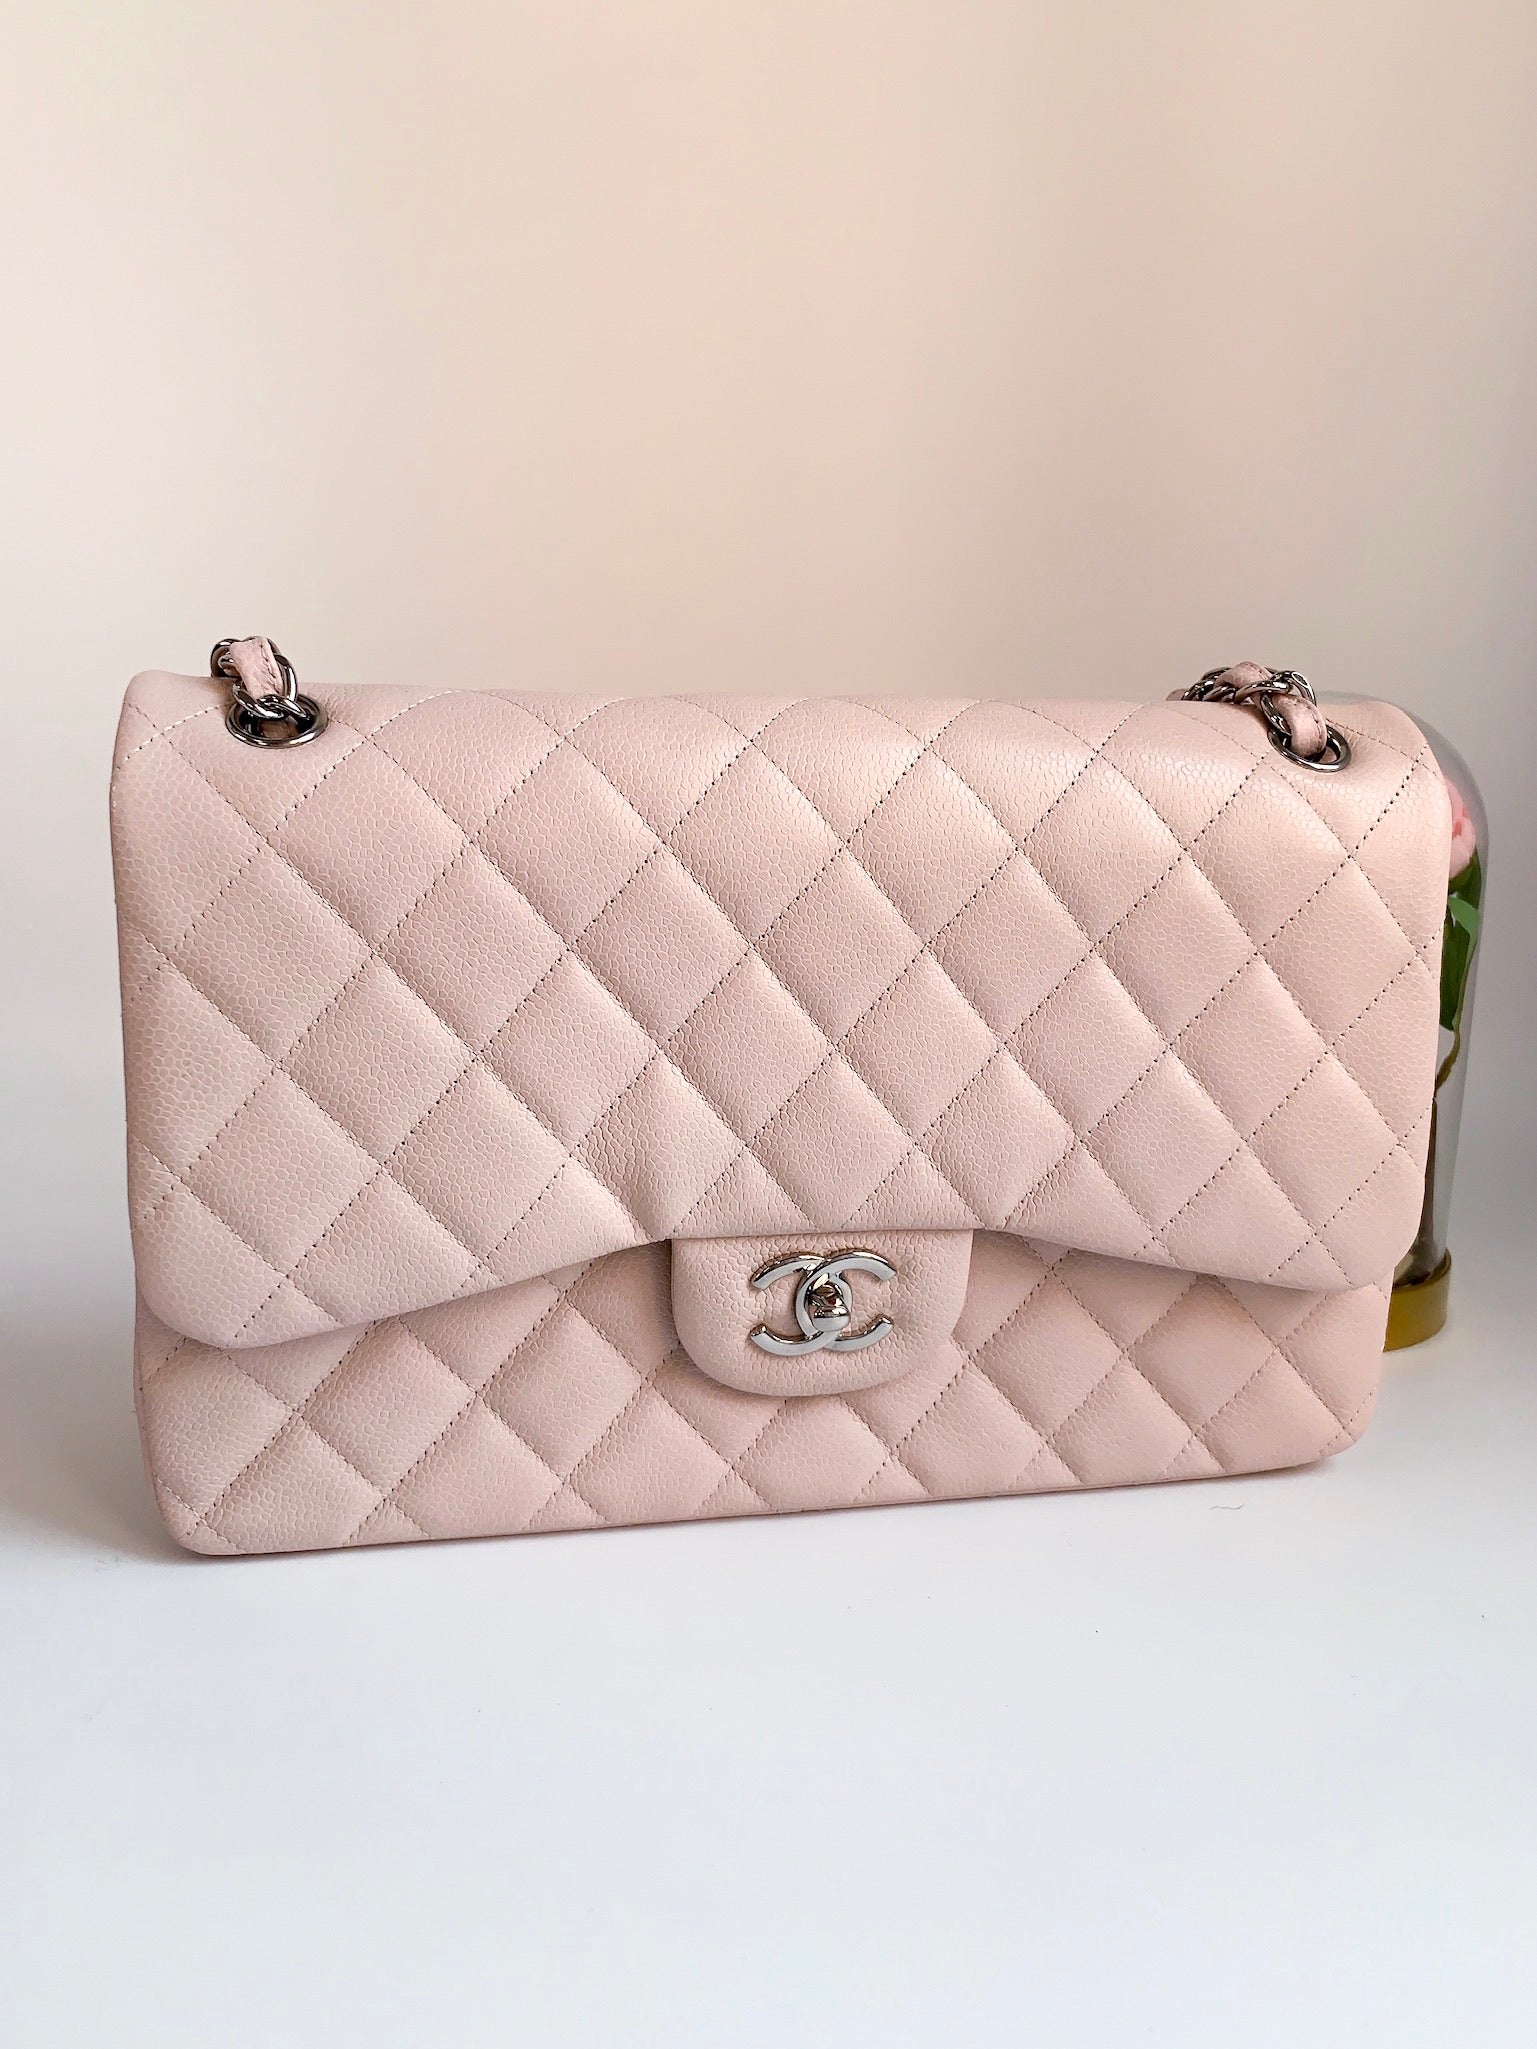 Chanel Bag Jumbo Double Flap Quilted Hot Pink Fuchsia Sueded Caviar new